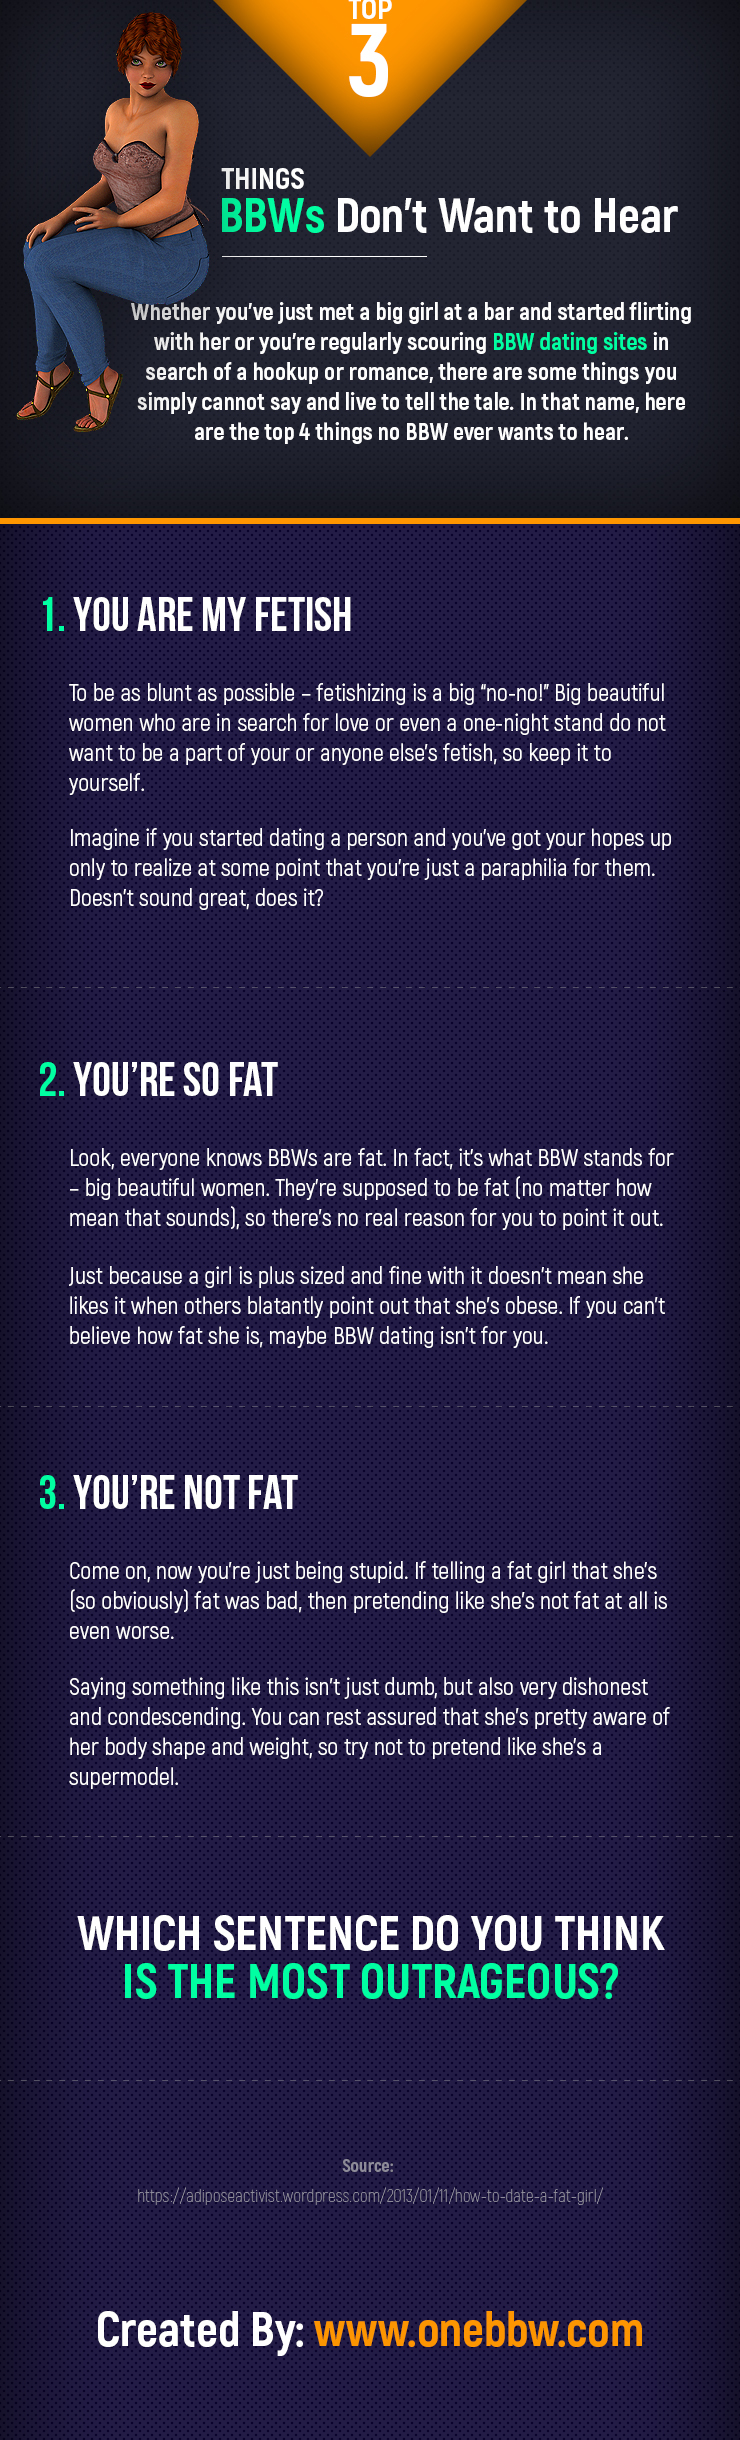 Top 4 Things BBWs Don’t Want to Hear